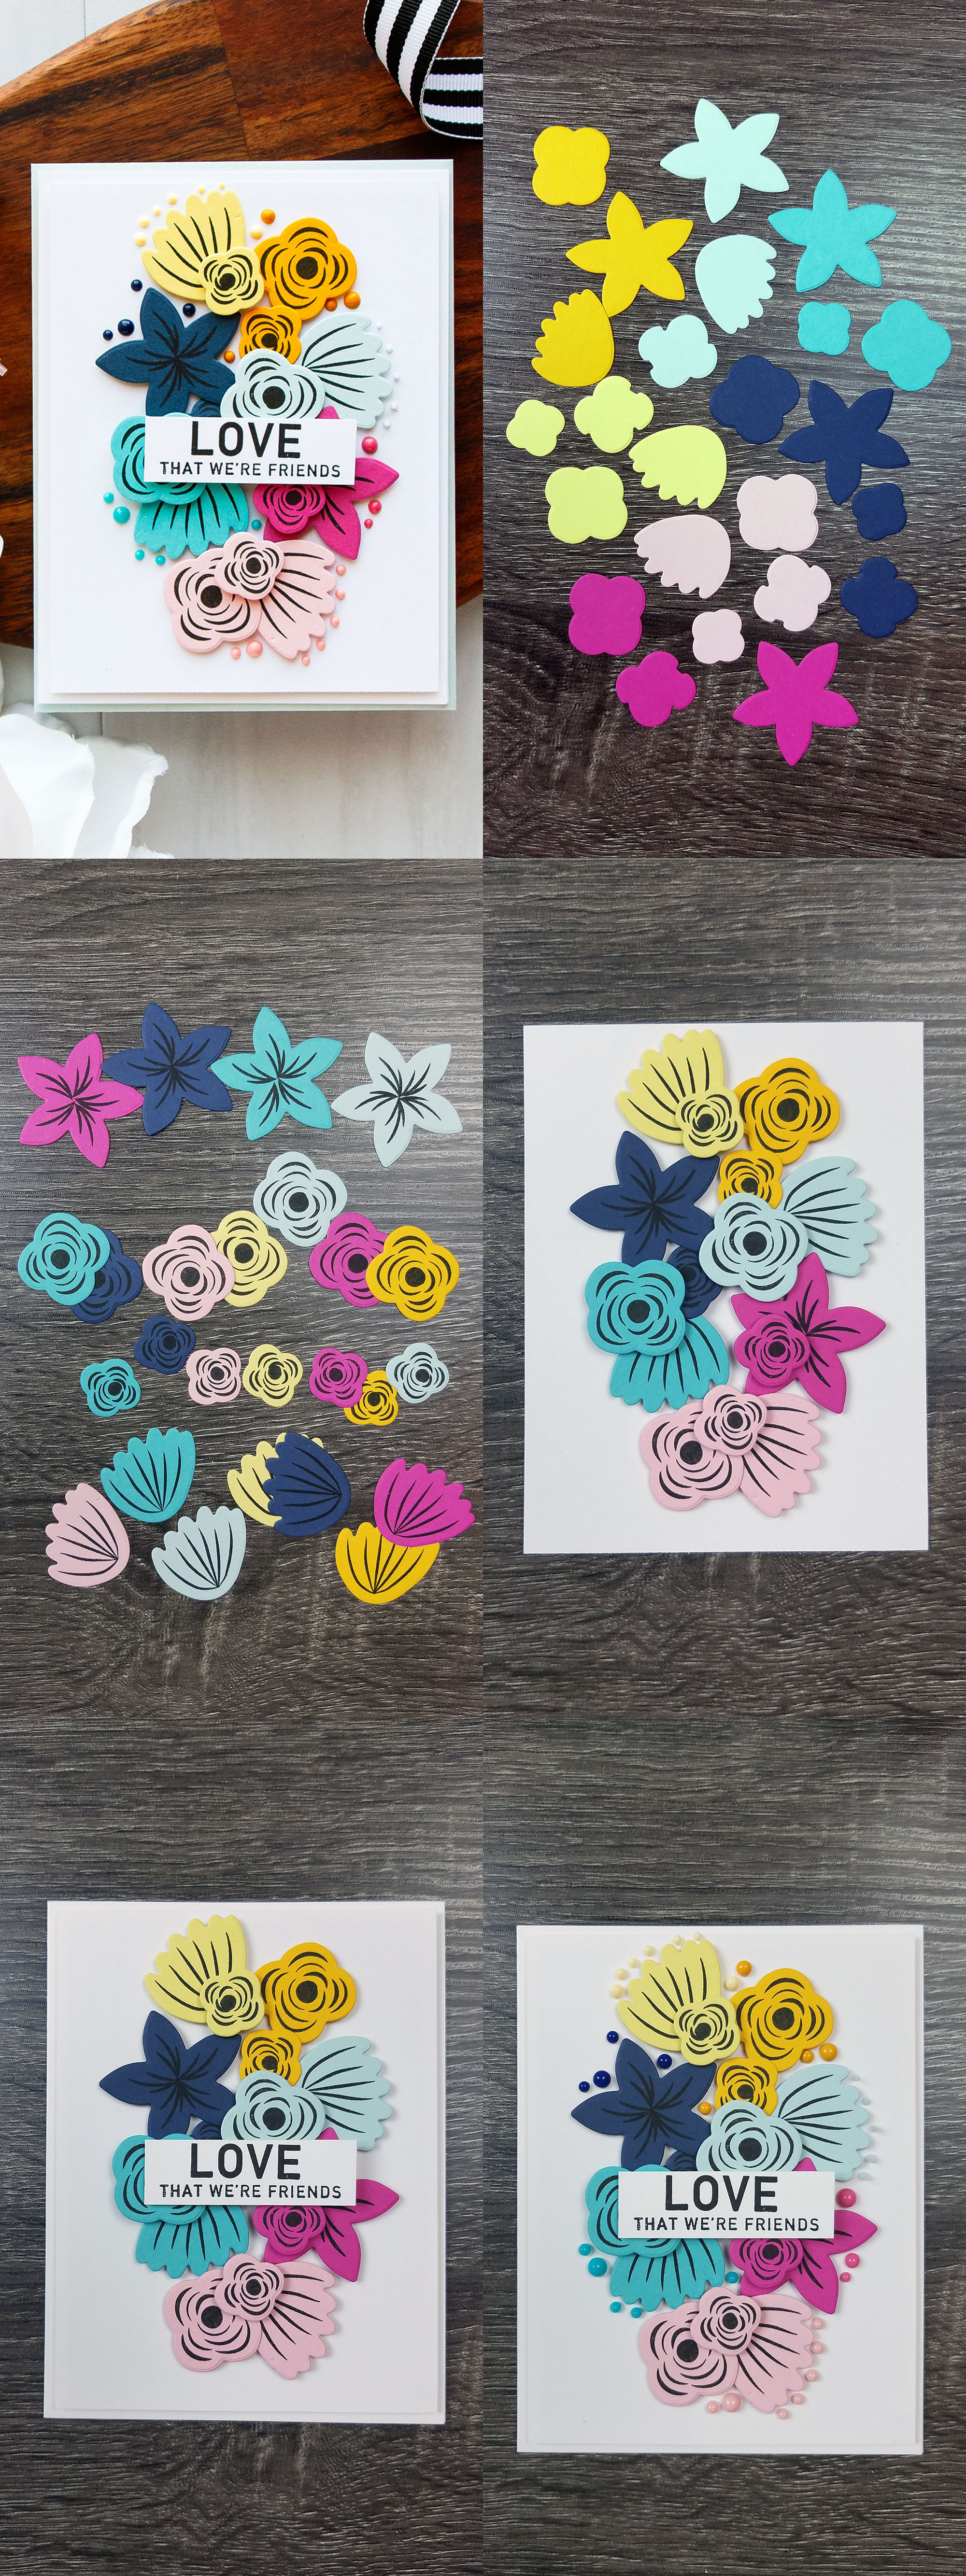 Simon Says Stamp | Colorful Circles Inspiration Turned Into Flowers using Hope Blooms Stamps